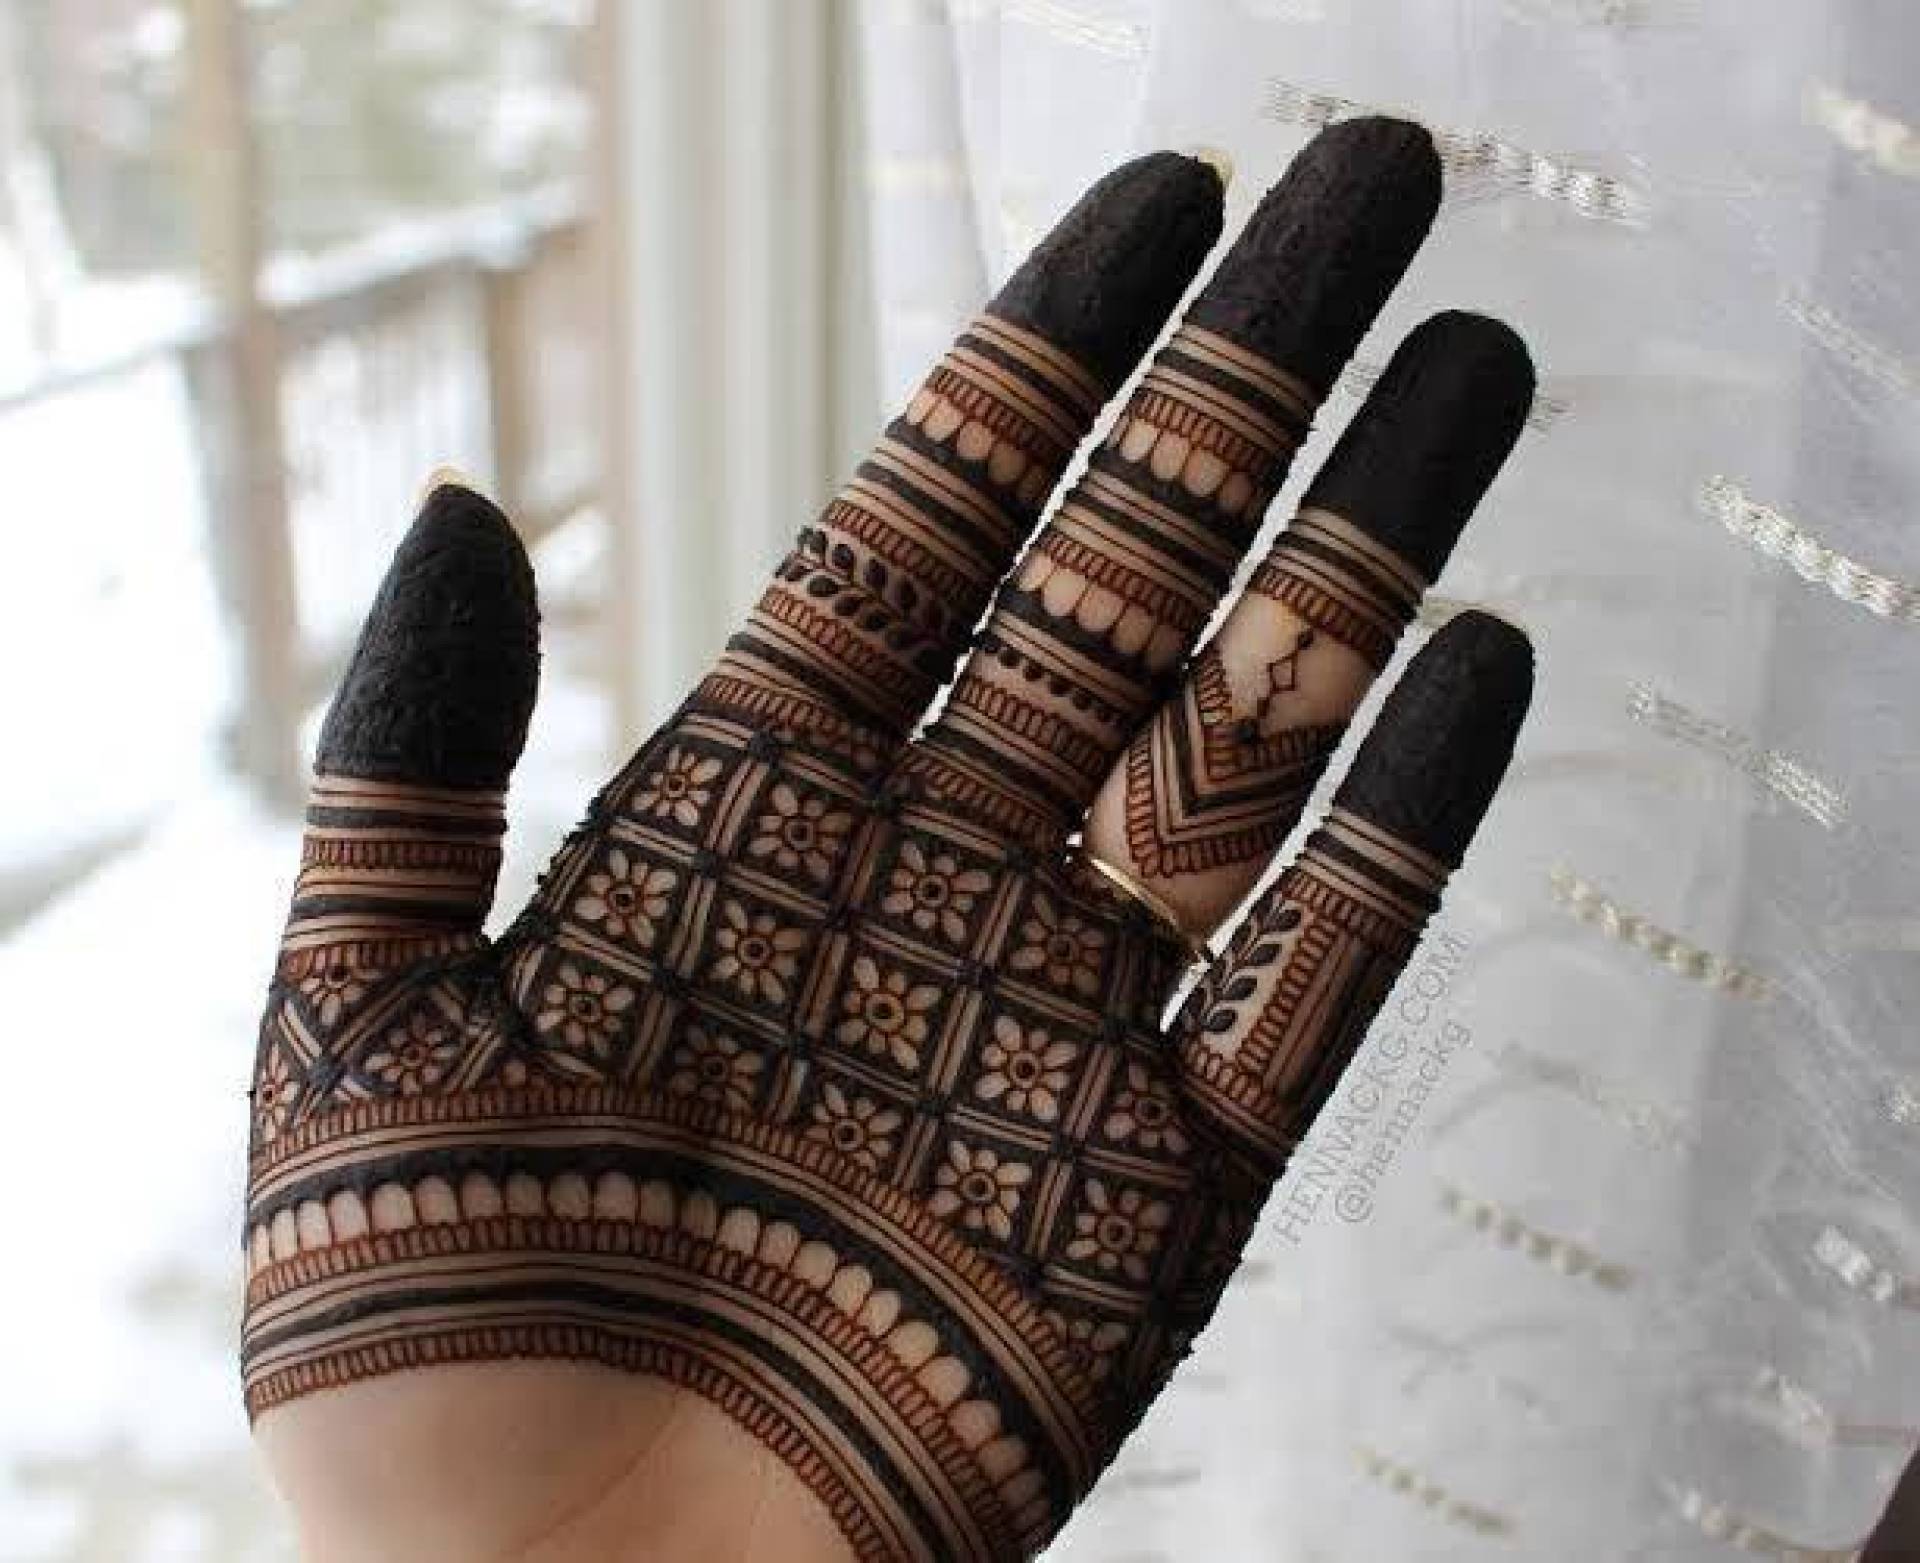 Full tutorial of this design is on my youtube channel - Henna Art by A... |  TikTok